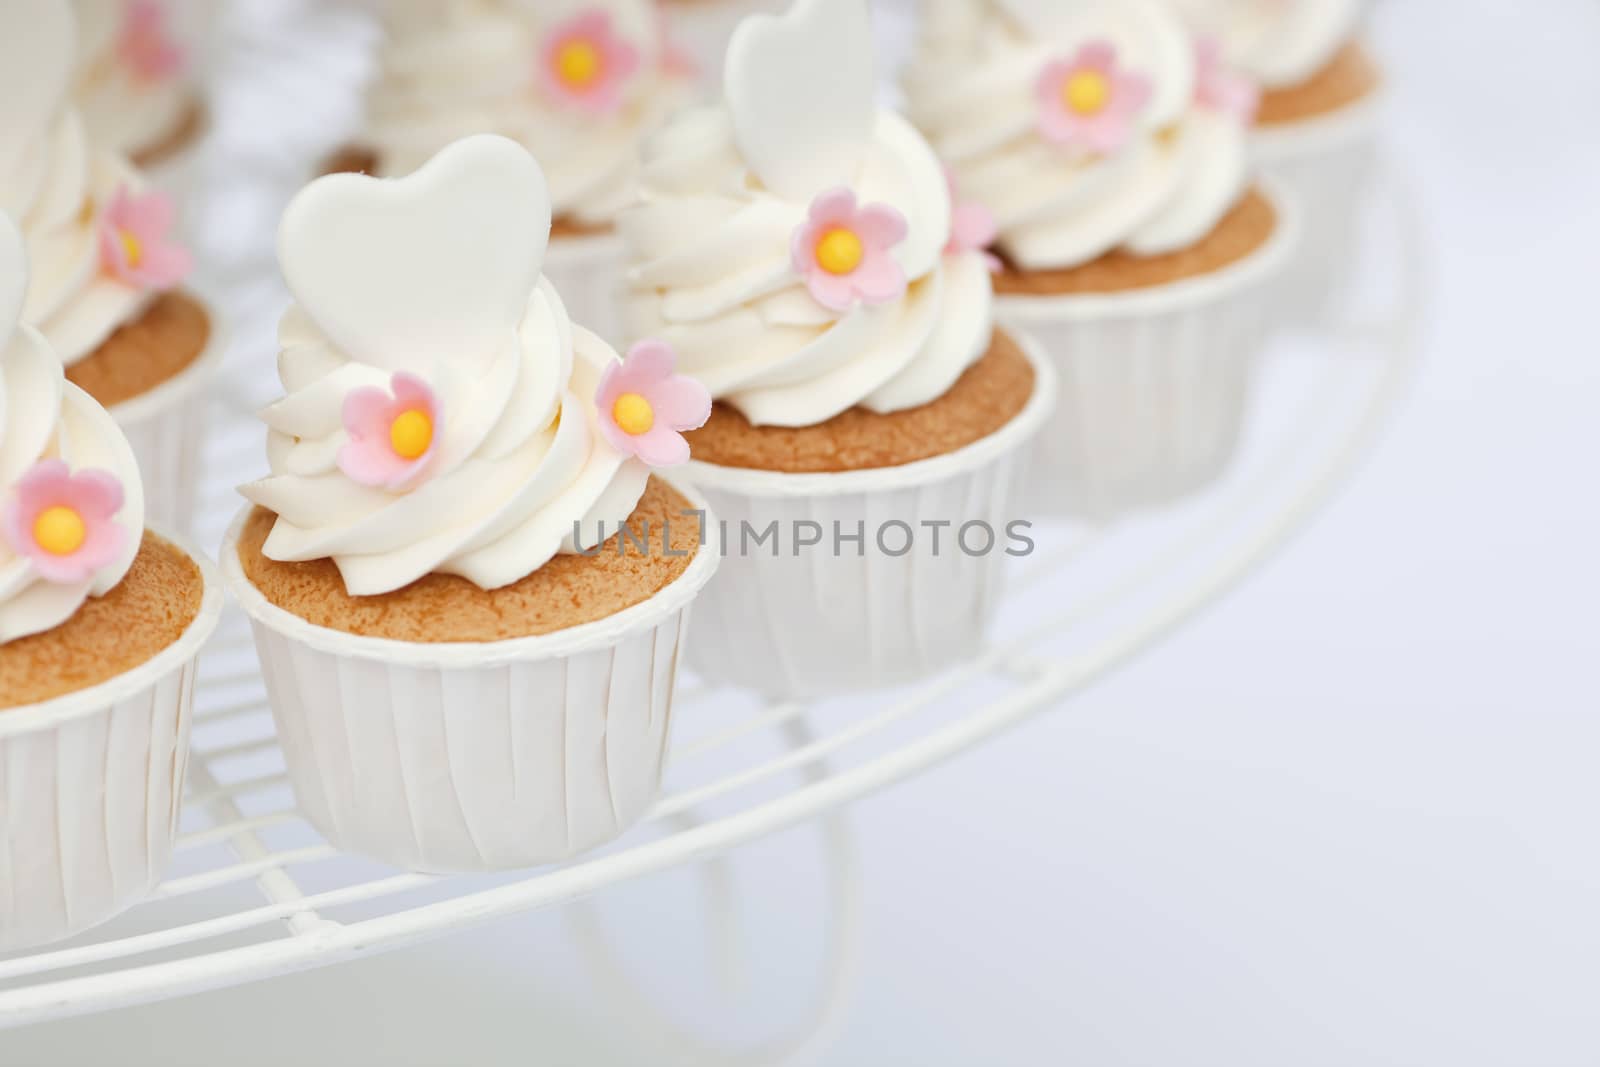 Heart shape decoration on cupcakes with shallow focus